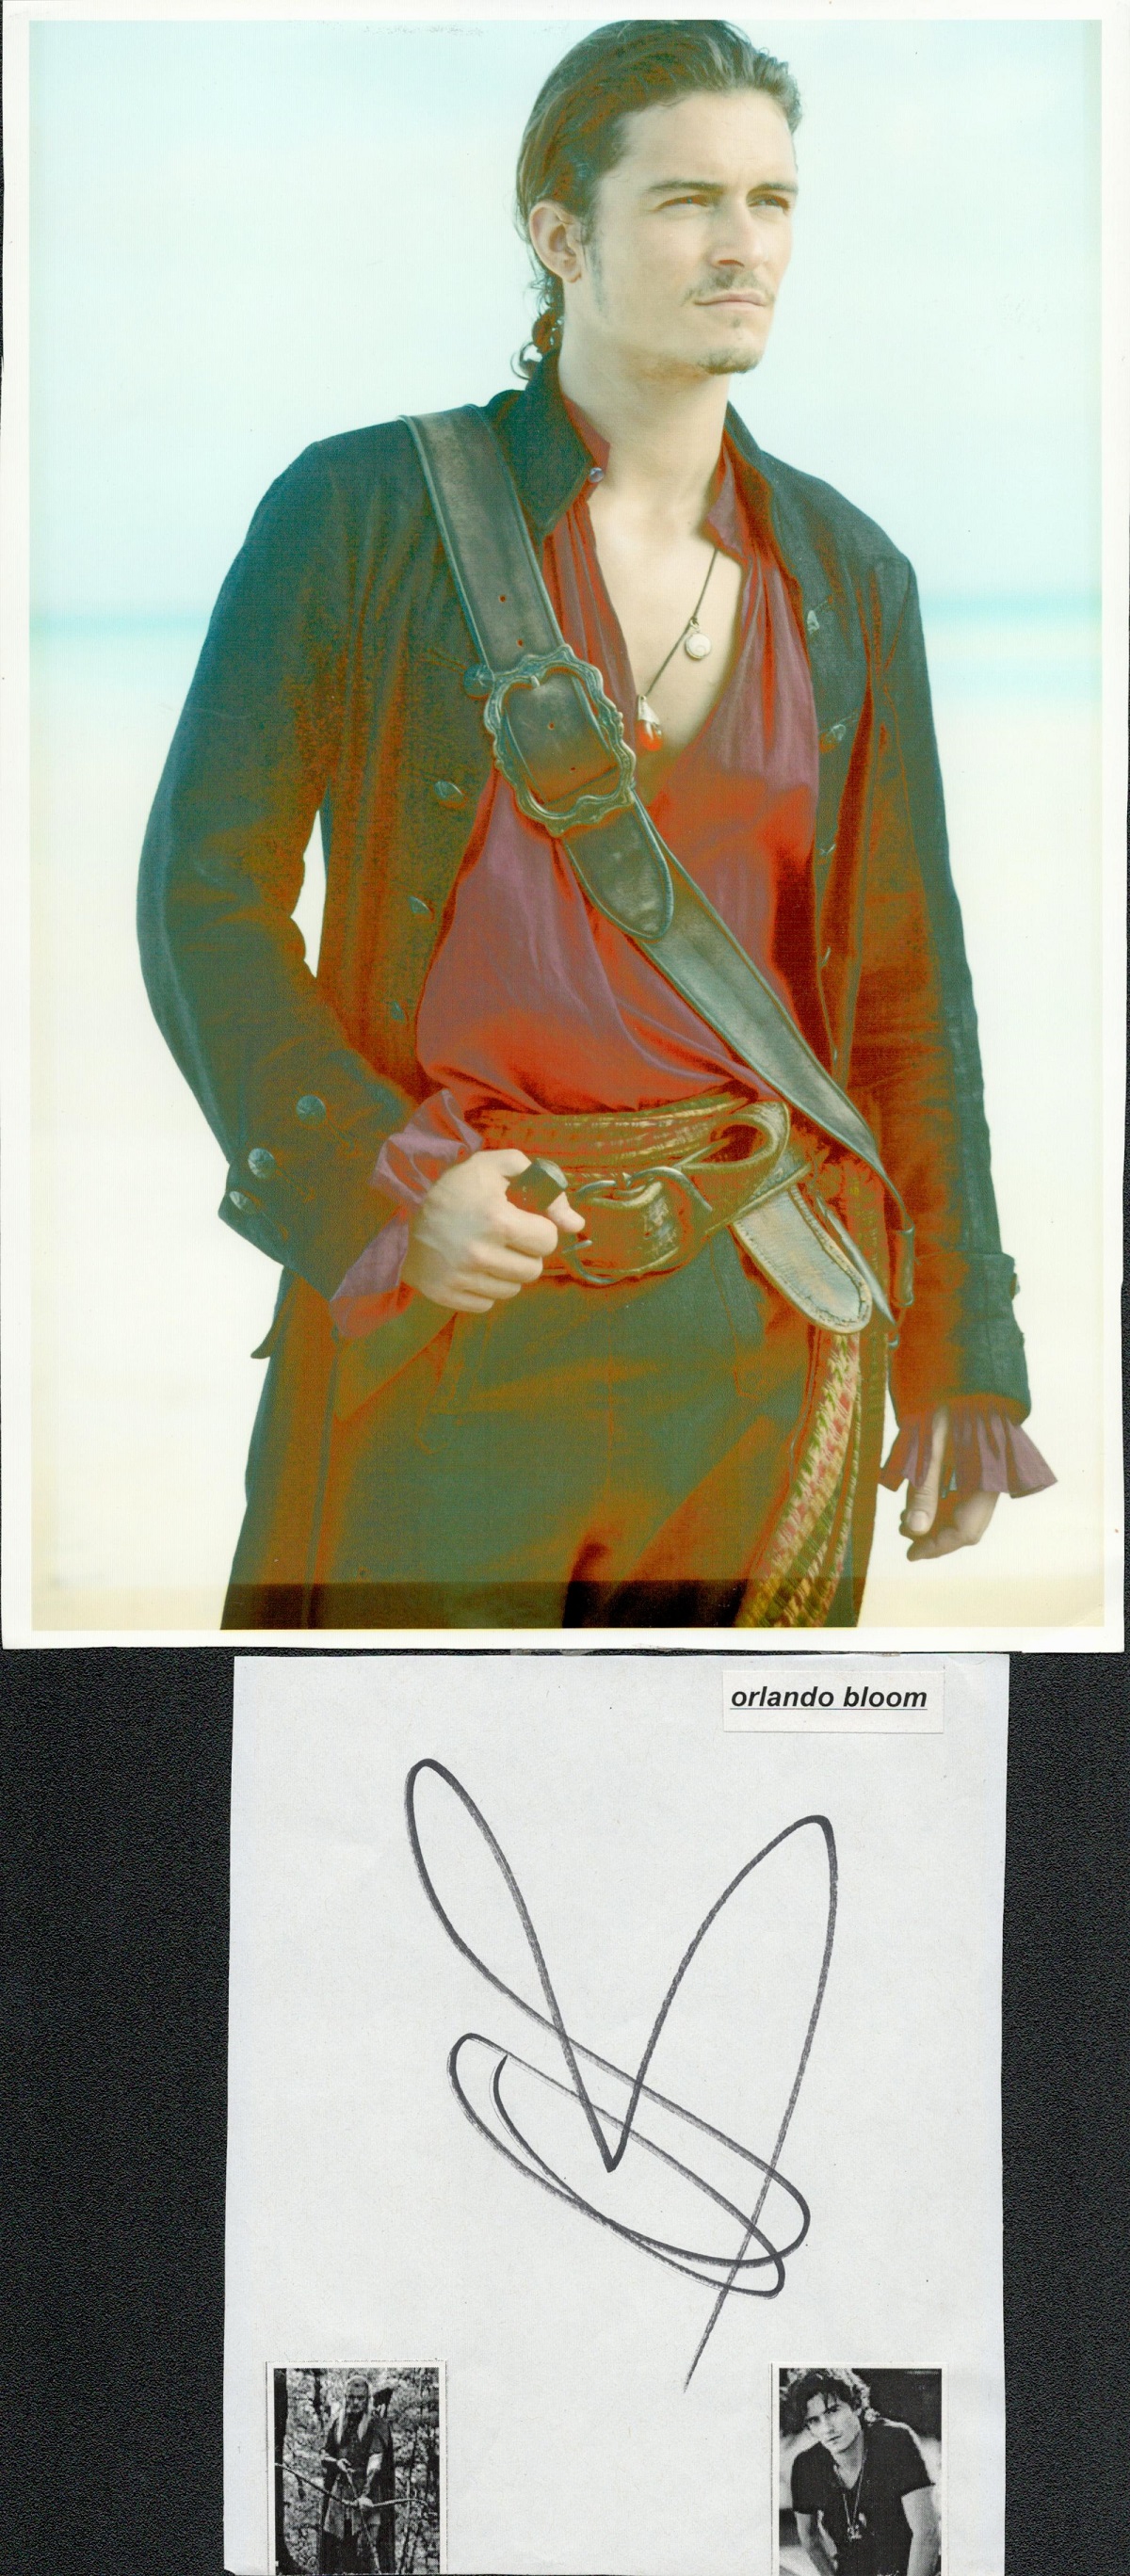 Orlando Bloom signed 6x5 album page comes with 10x8 Pirates of the Caribbean colour photo. Good